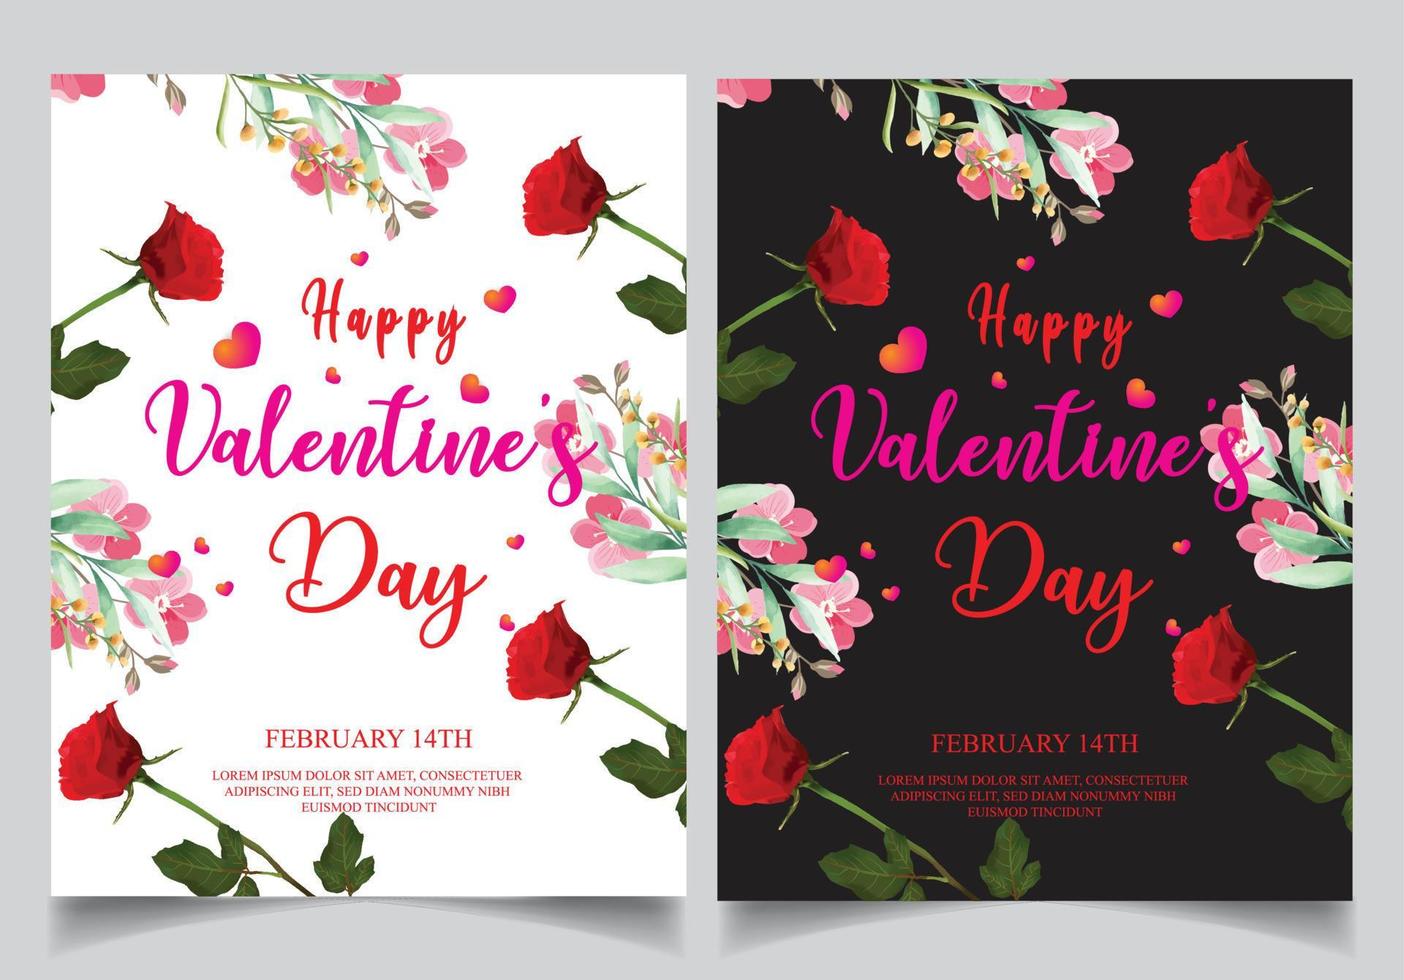 Rose greetings on Valentine's Day . designs for banner and poster templates vector